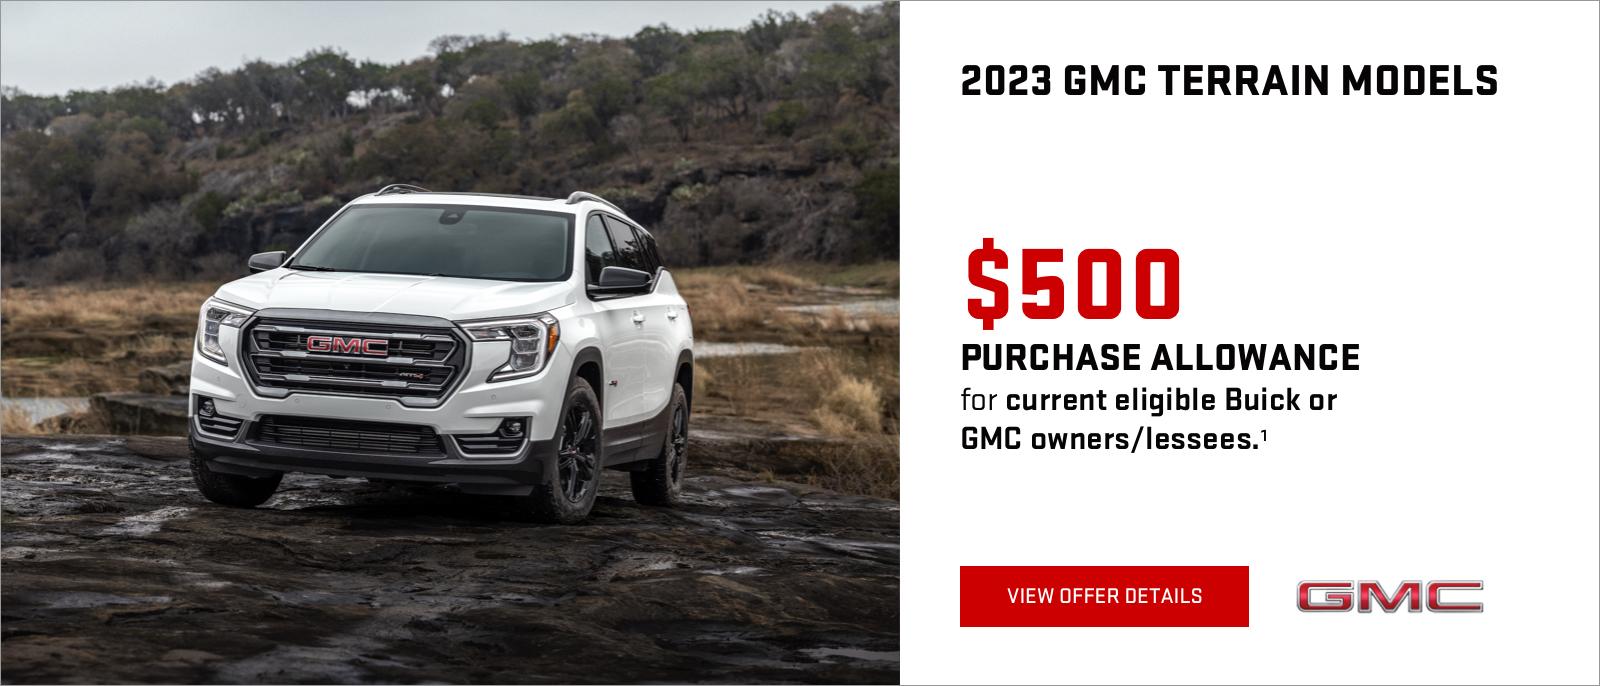 $500 PURCHASE ALLOWANCE for current eligible Buick or GMC owners/lessees.1